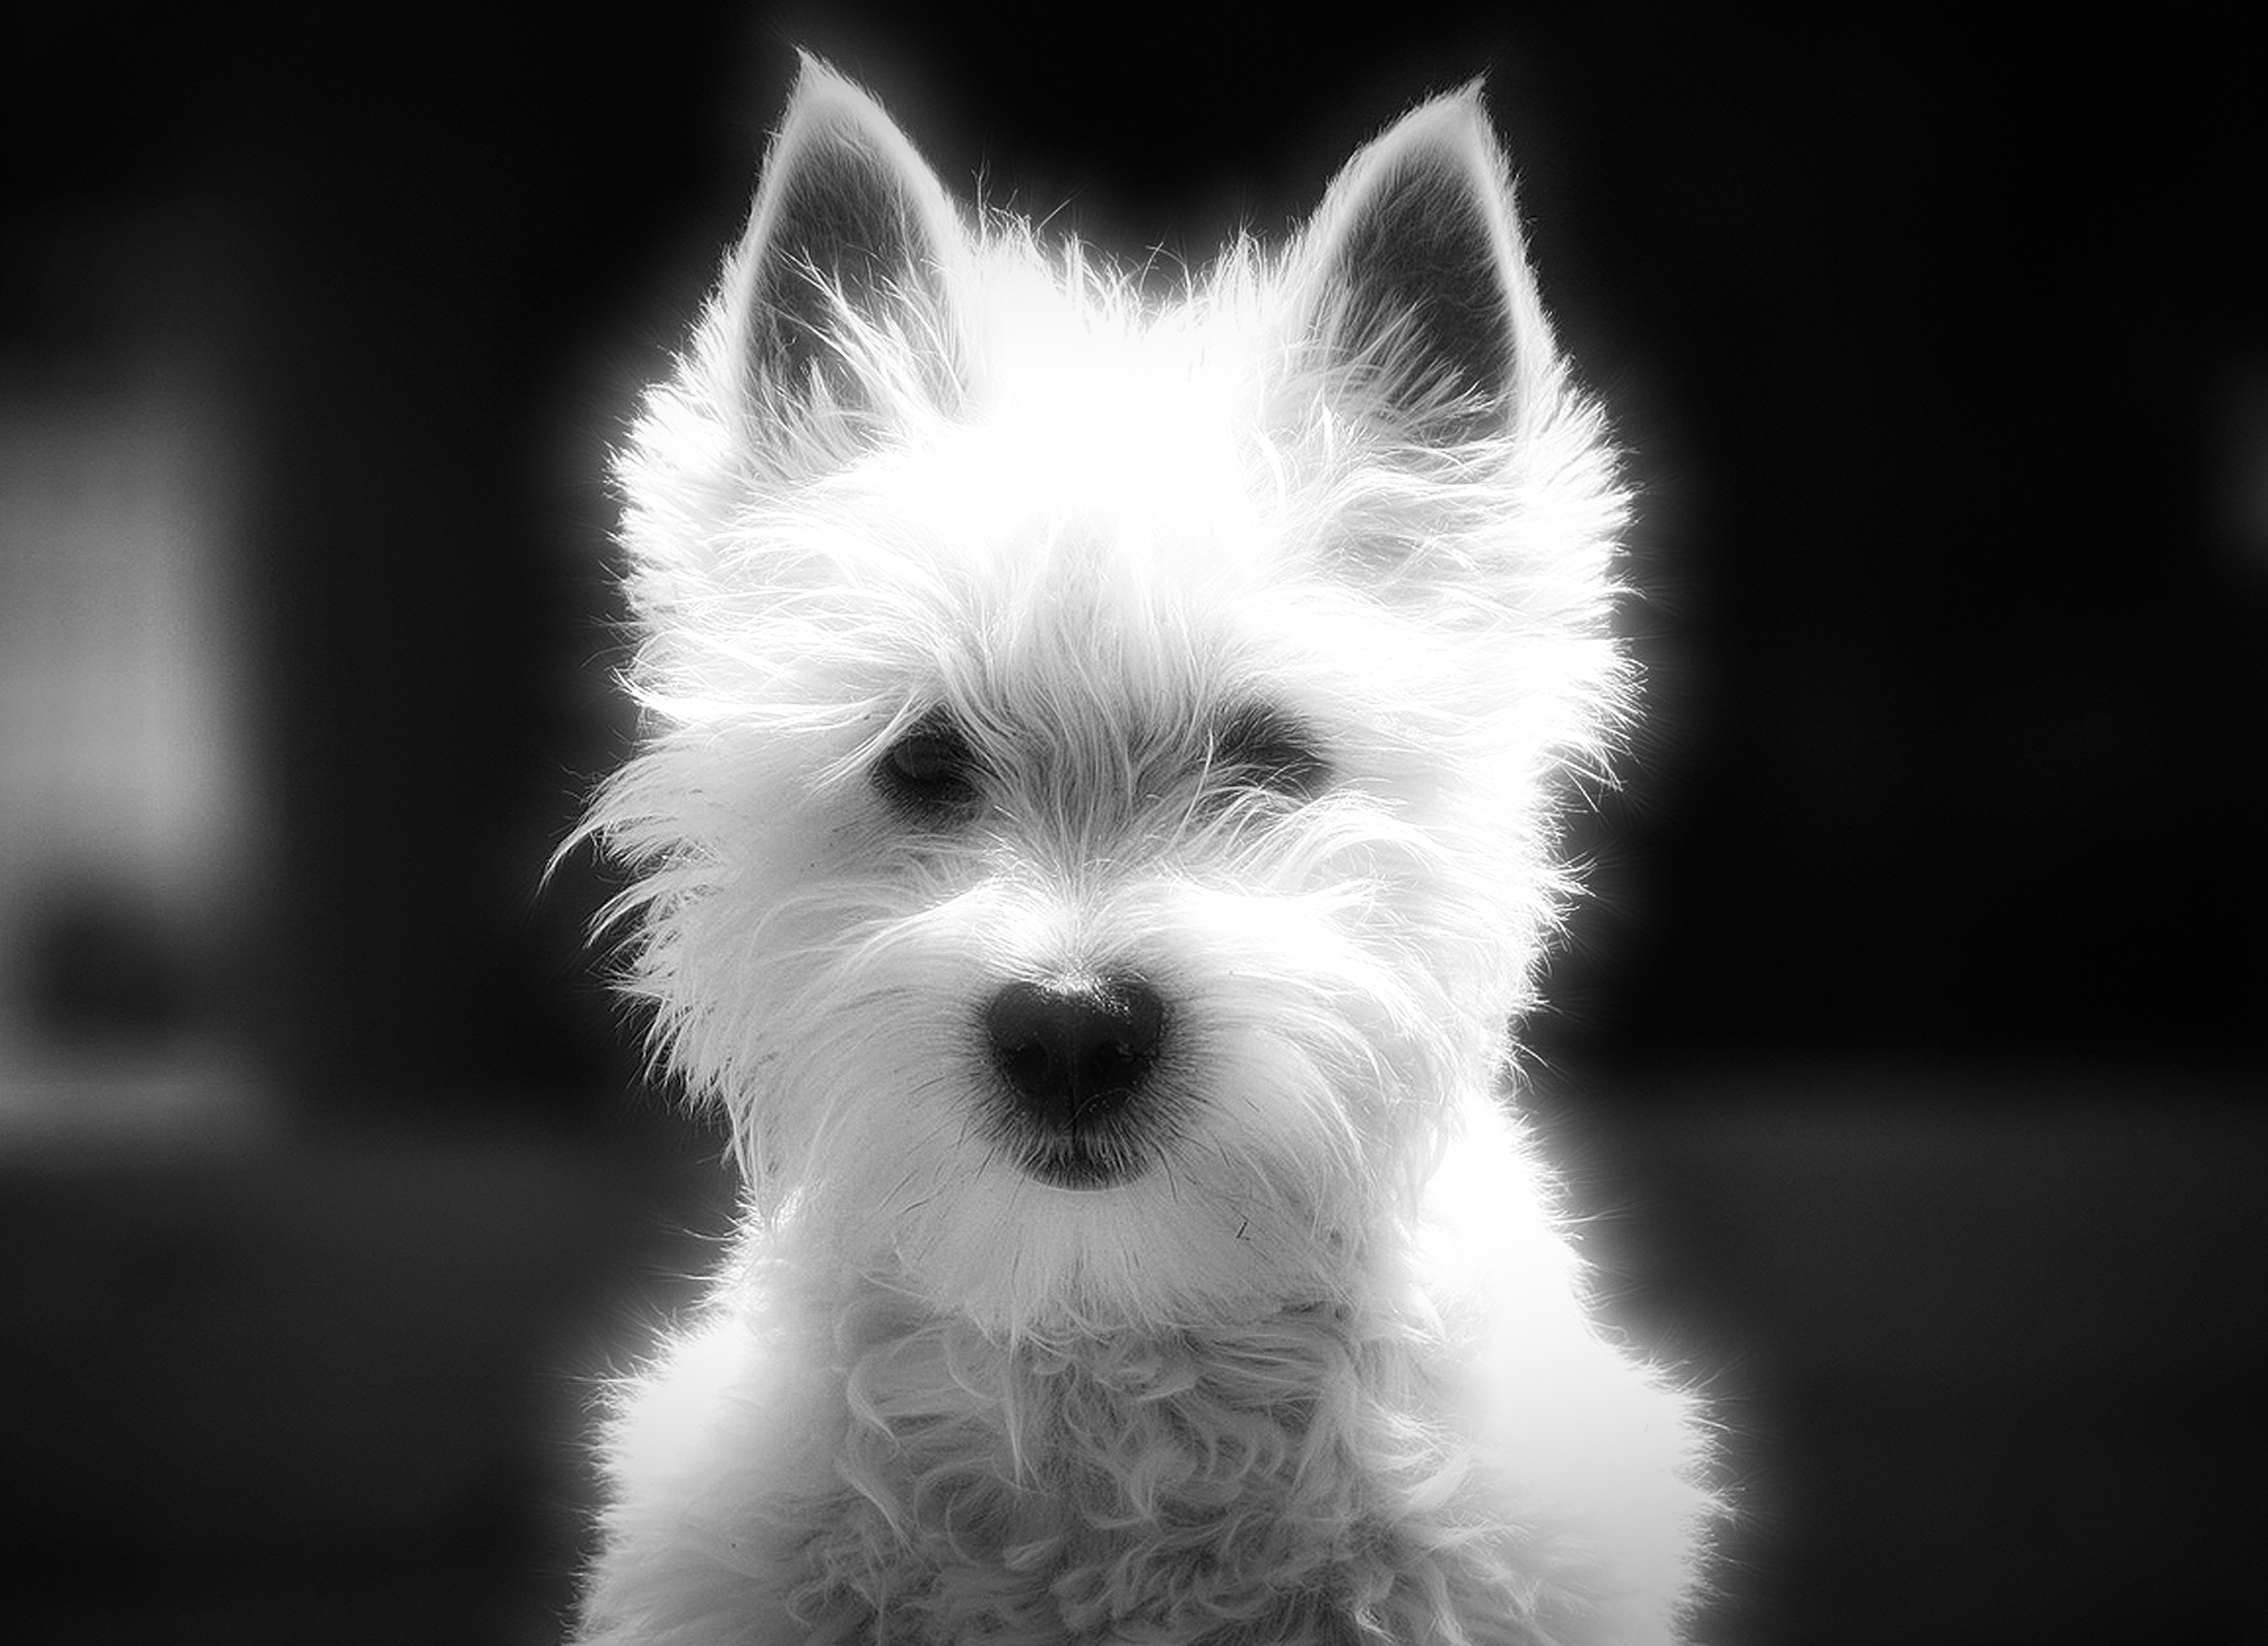 West Highland Terrier Black and White Art Blank Greeting Card